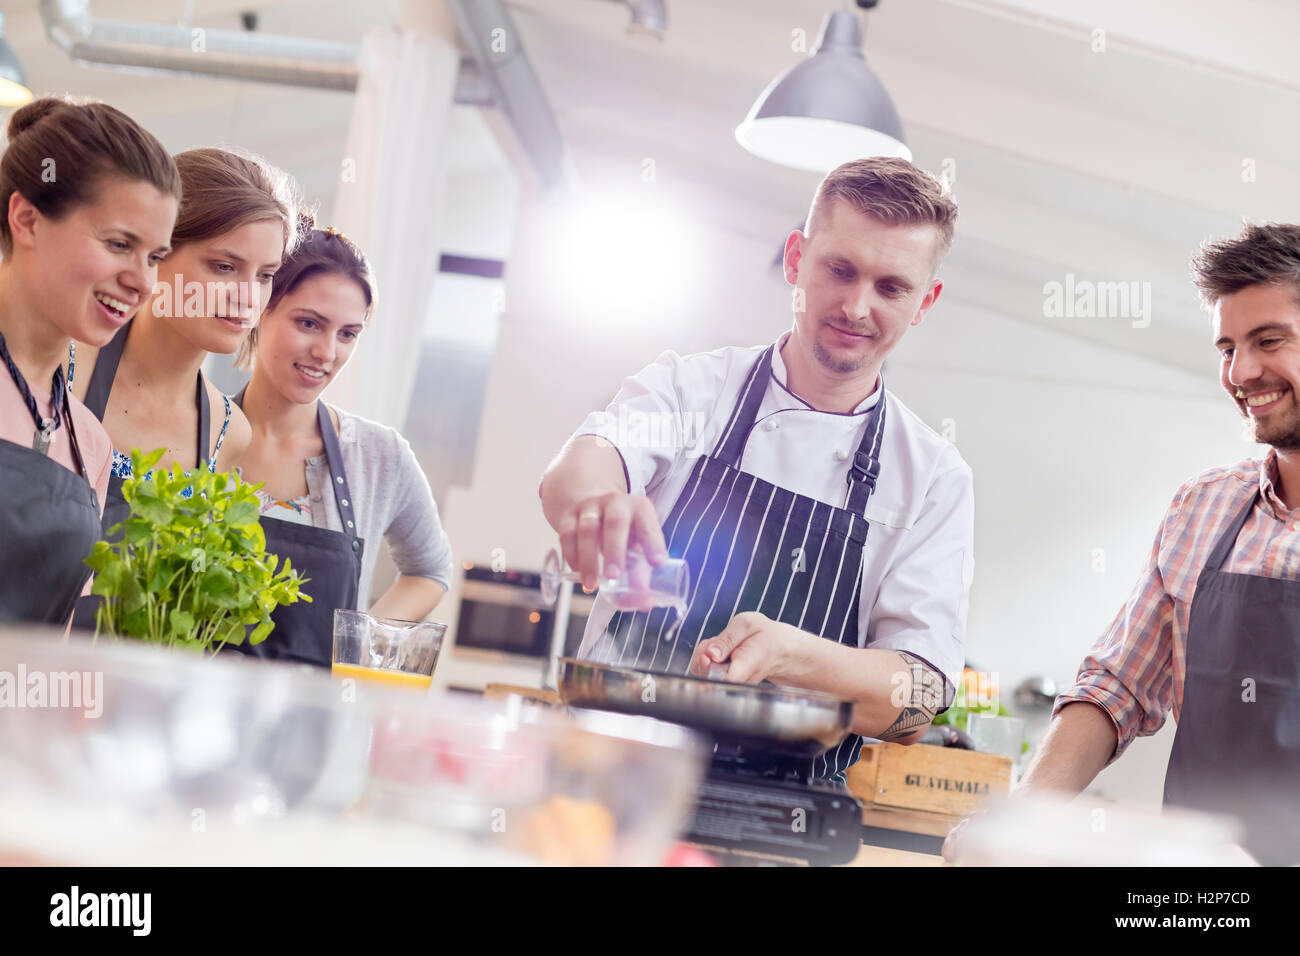 Students watching chef teacher at frying pan in cooking class kitchen Stock Photo